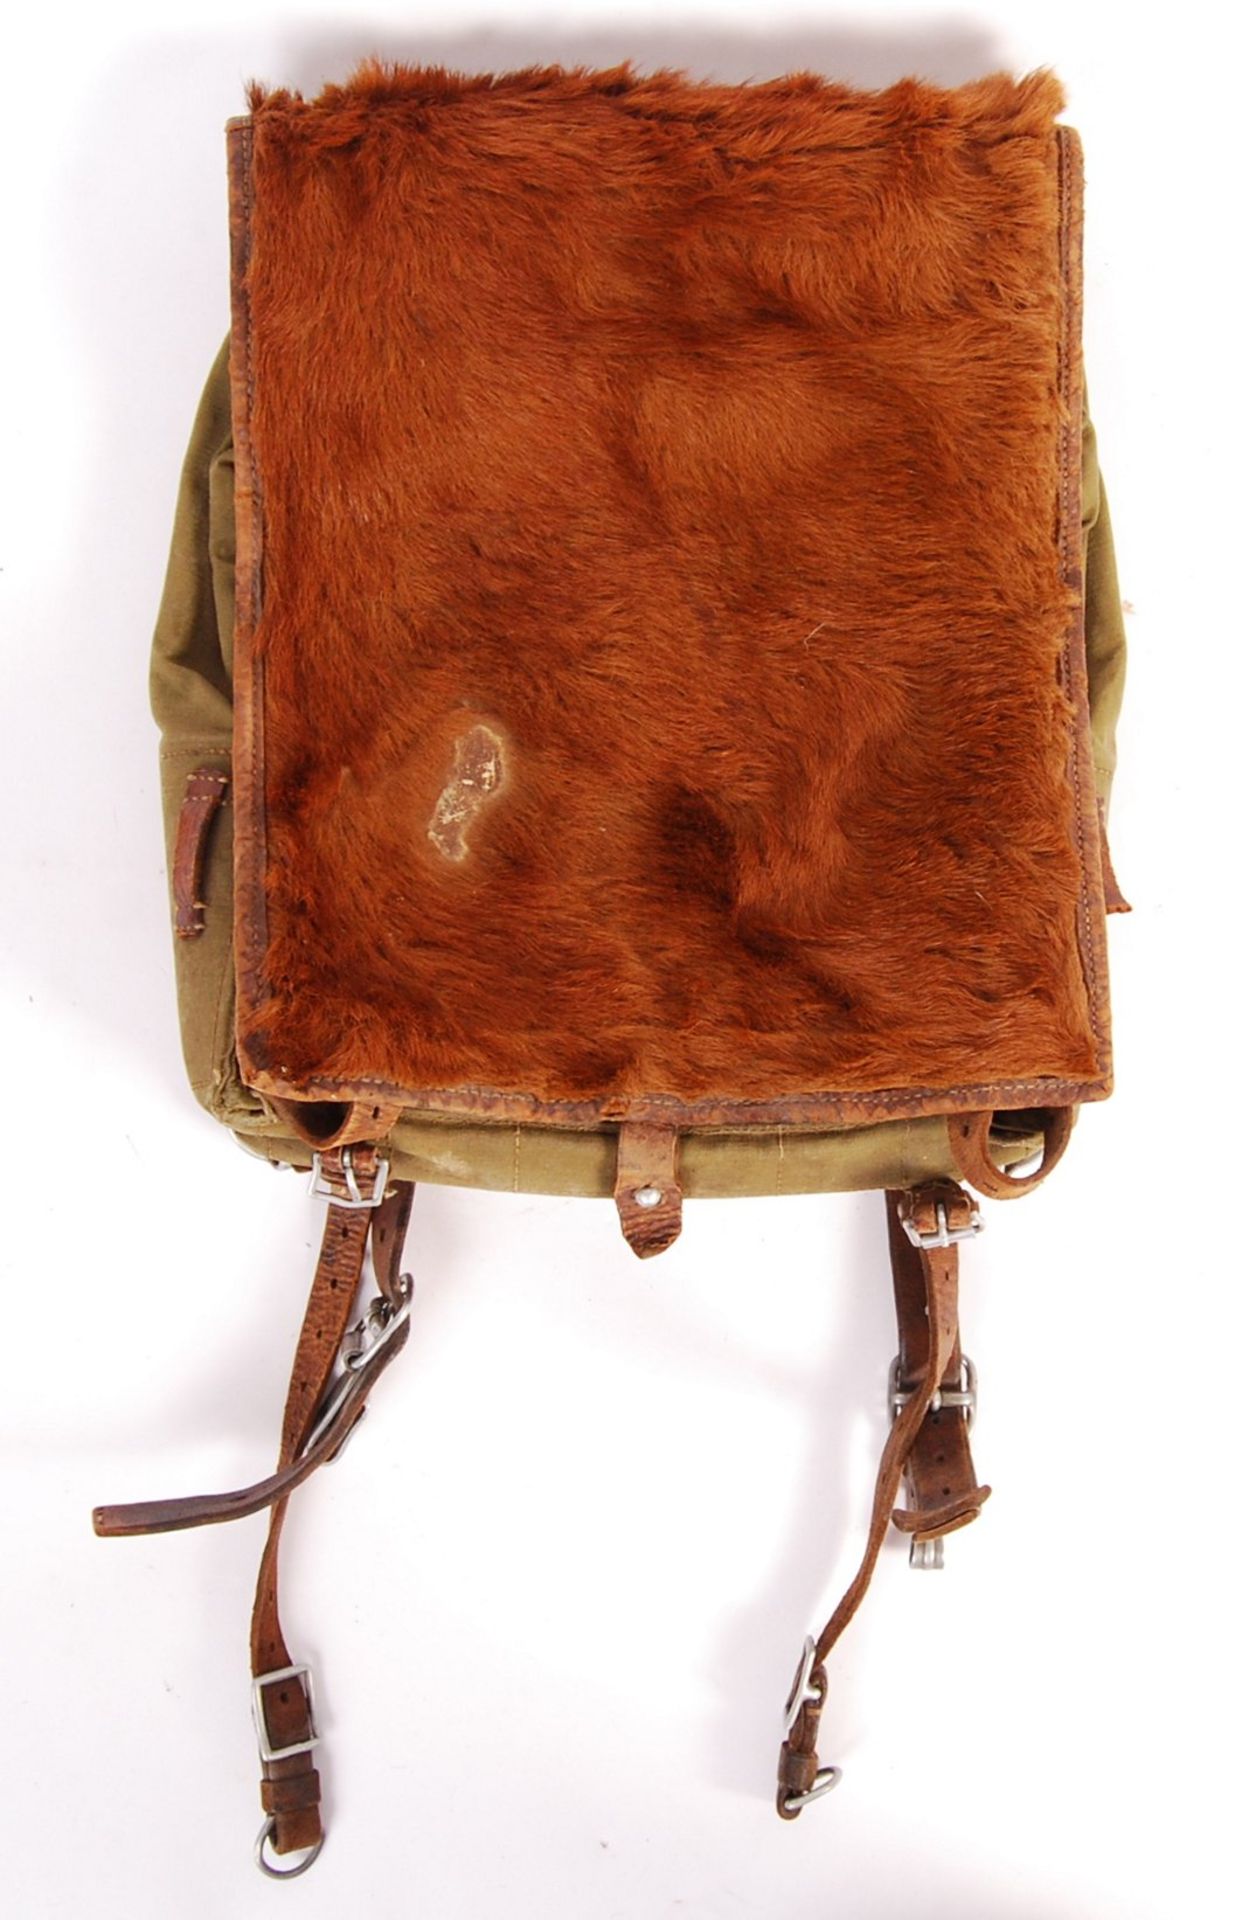 ORIGINAL PRE-WWII GERMAN ARMY TORNISTER BACK PACK